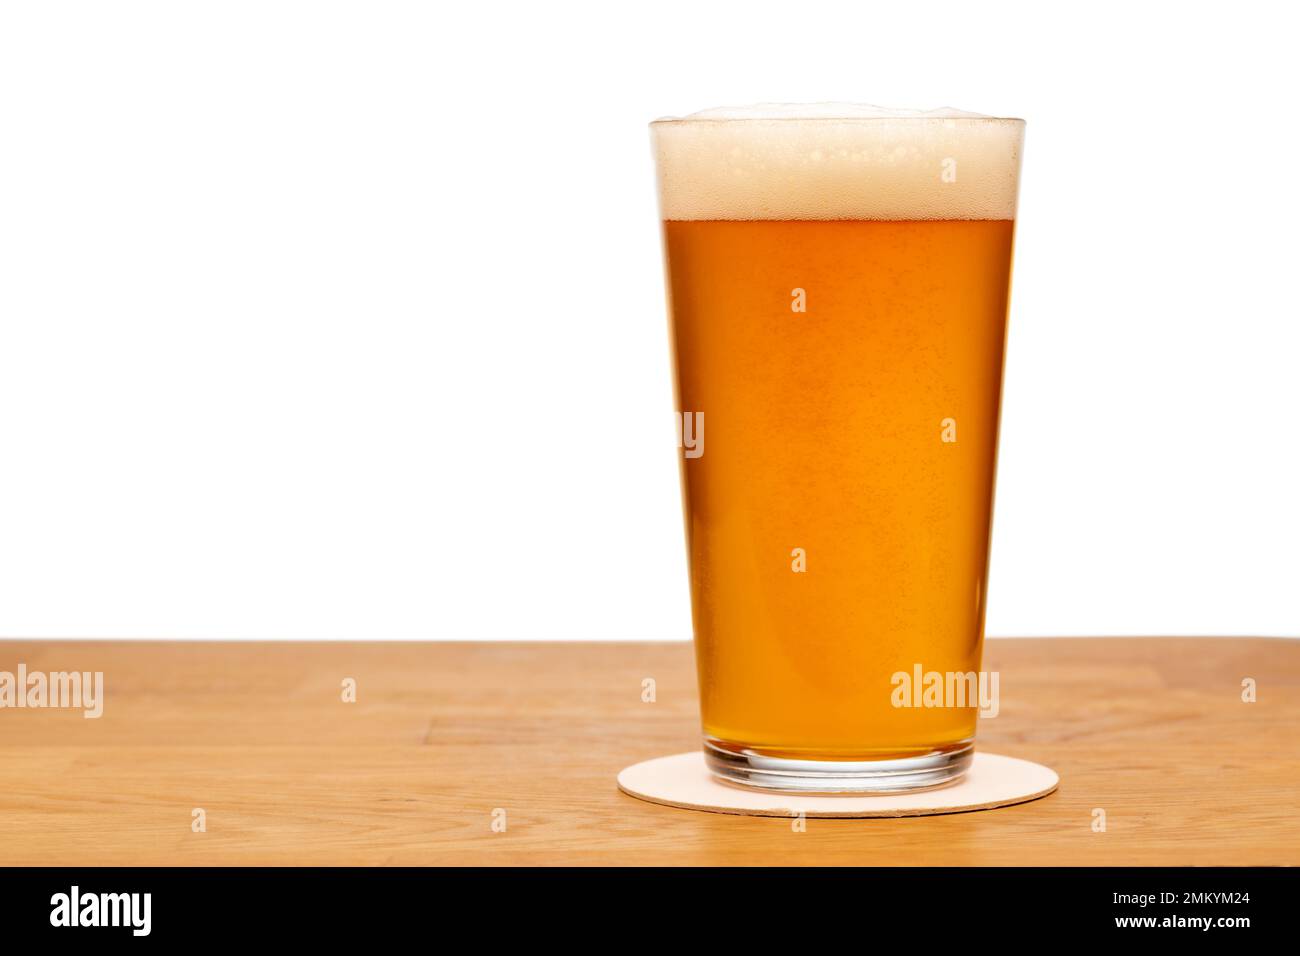 Full shaker pint glass of craft ale or beer on wooden table with white background Stock Photo